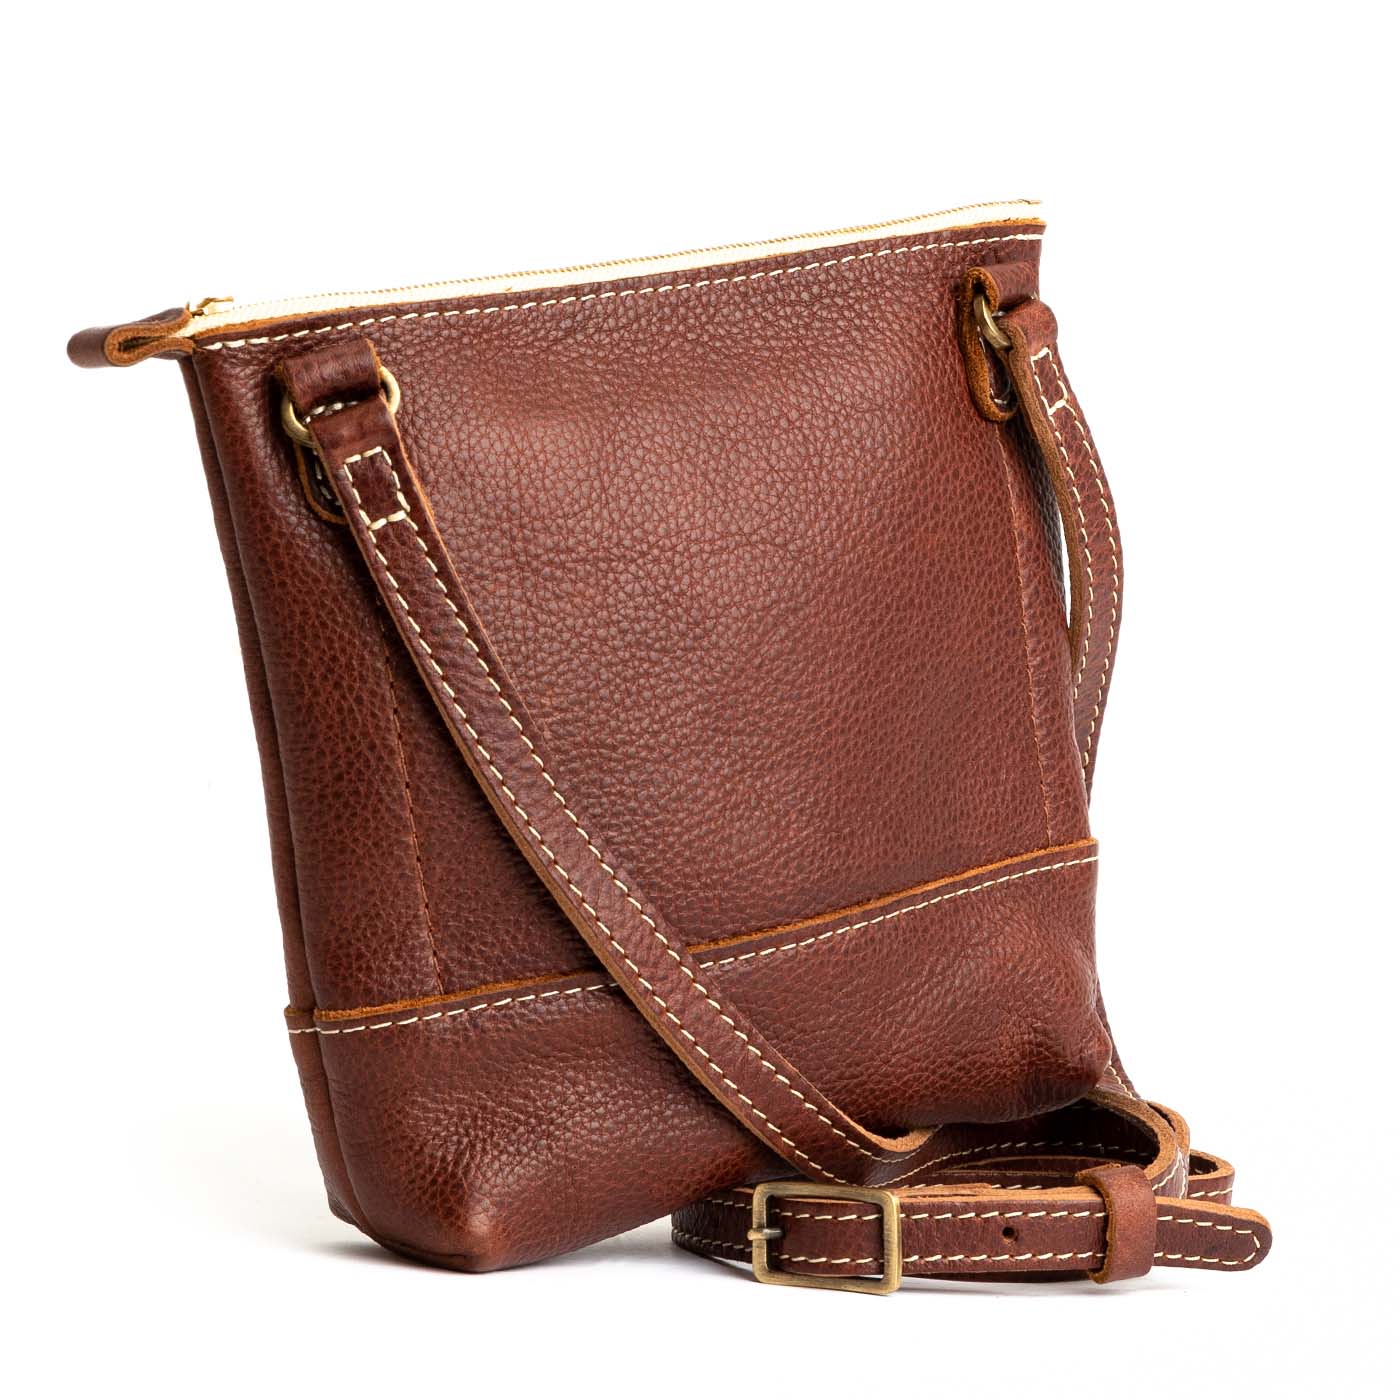 The Box | Leather Handbag | Women's Leather Purse | Shoulder Bag/Crossbody  Bags | Real Leather